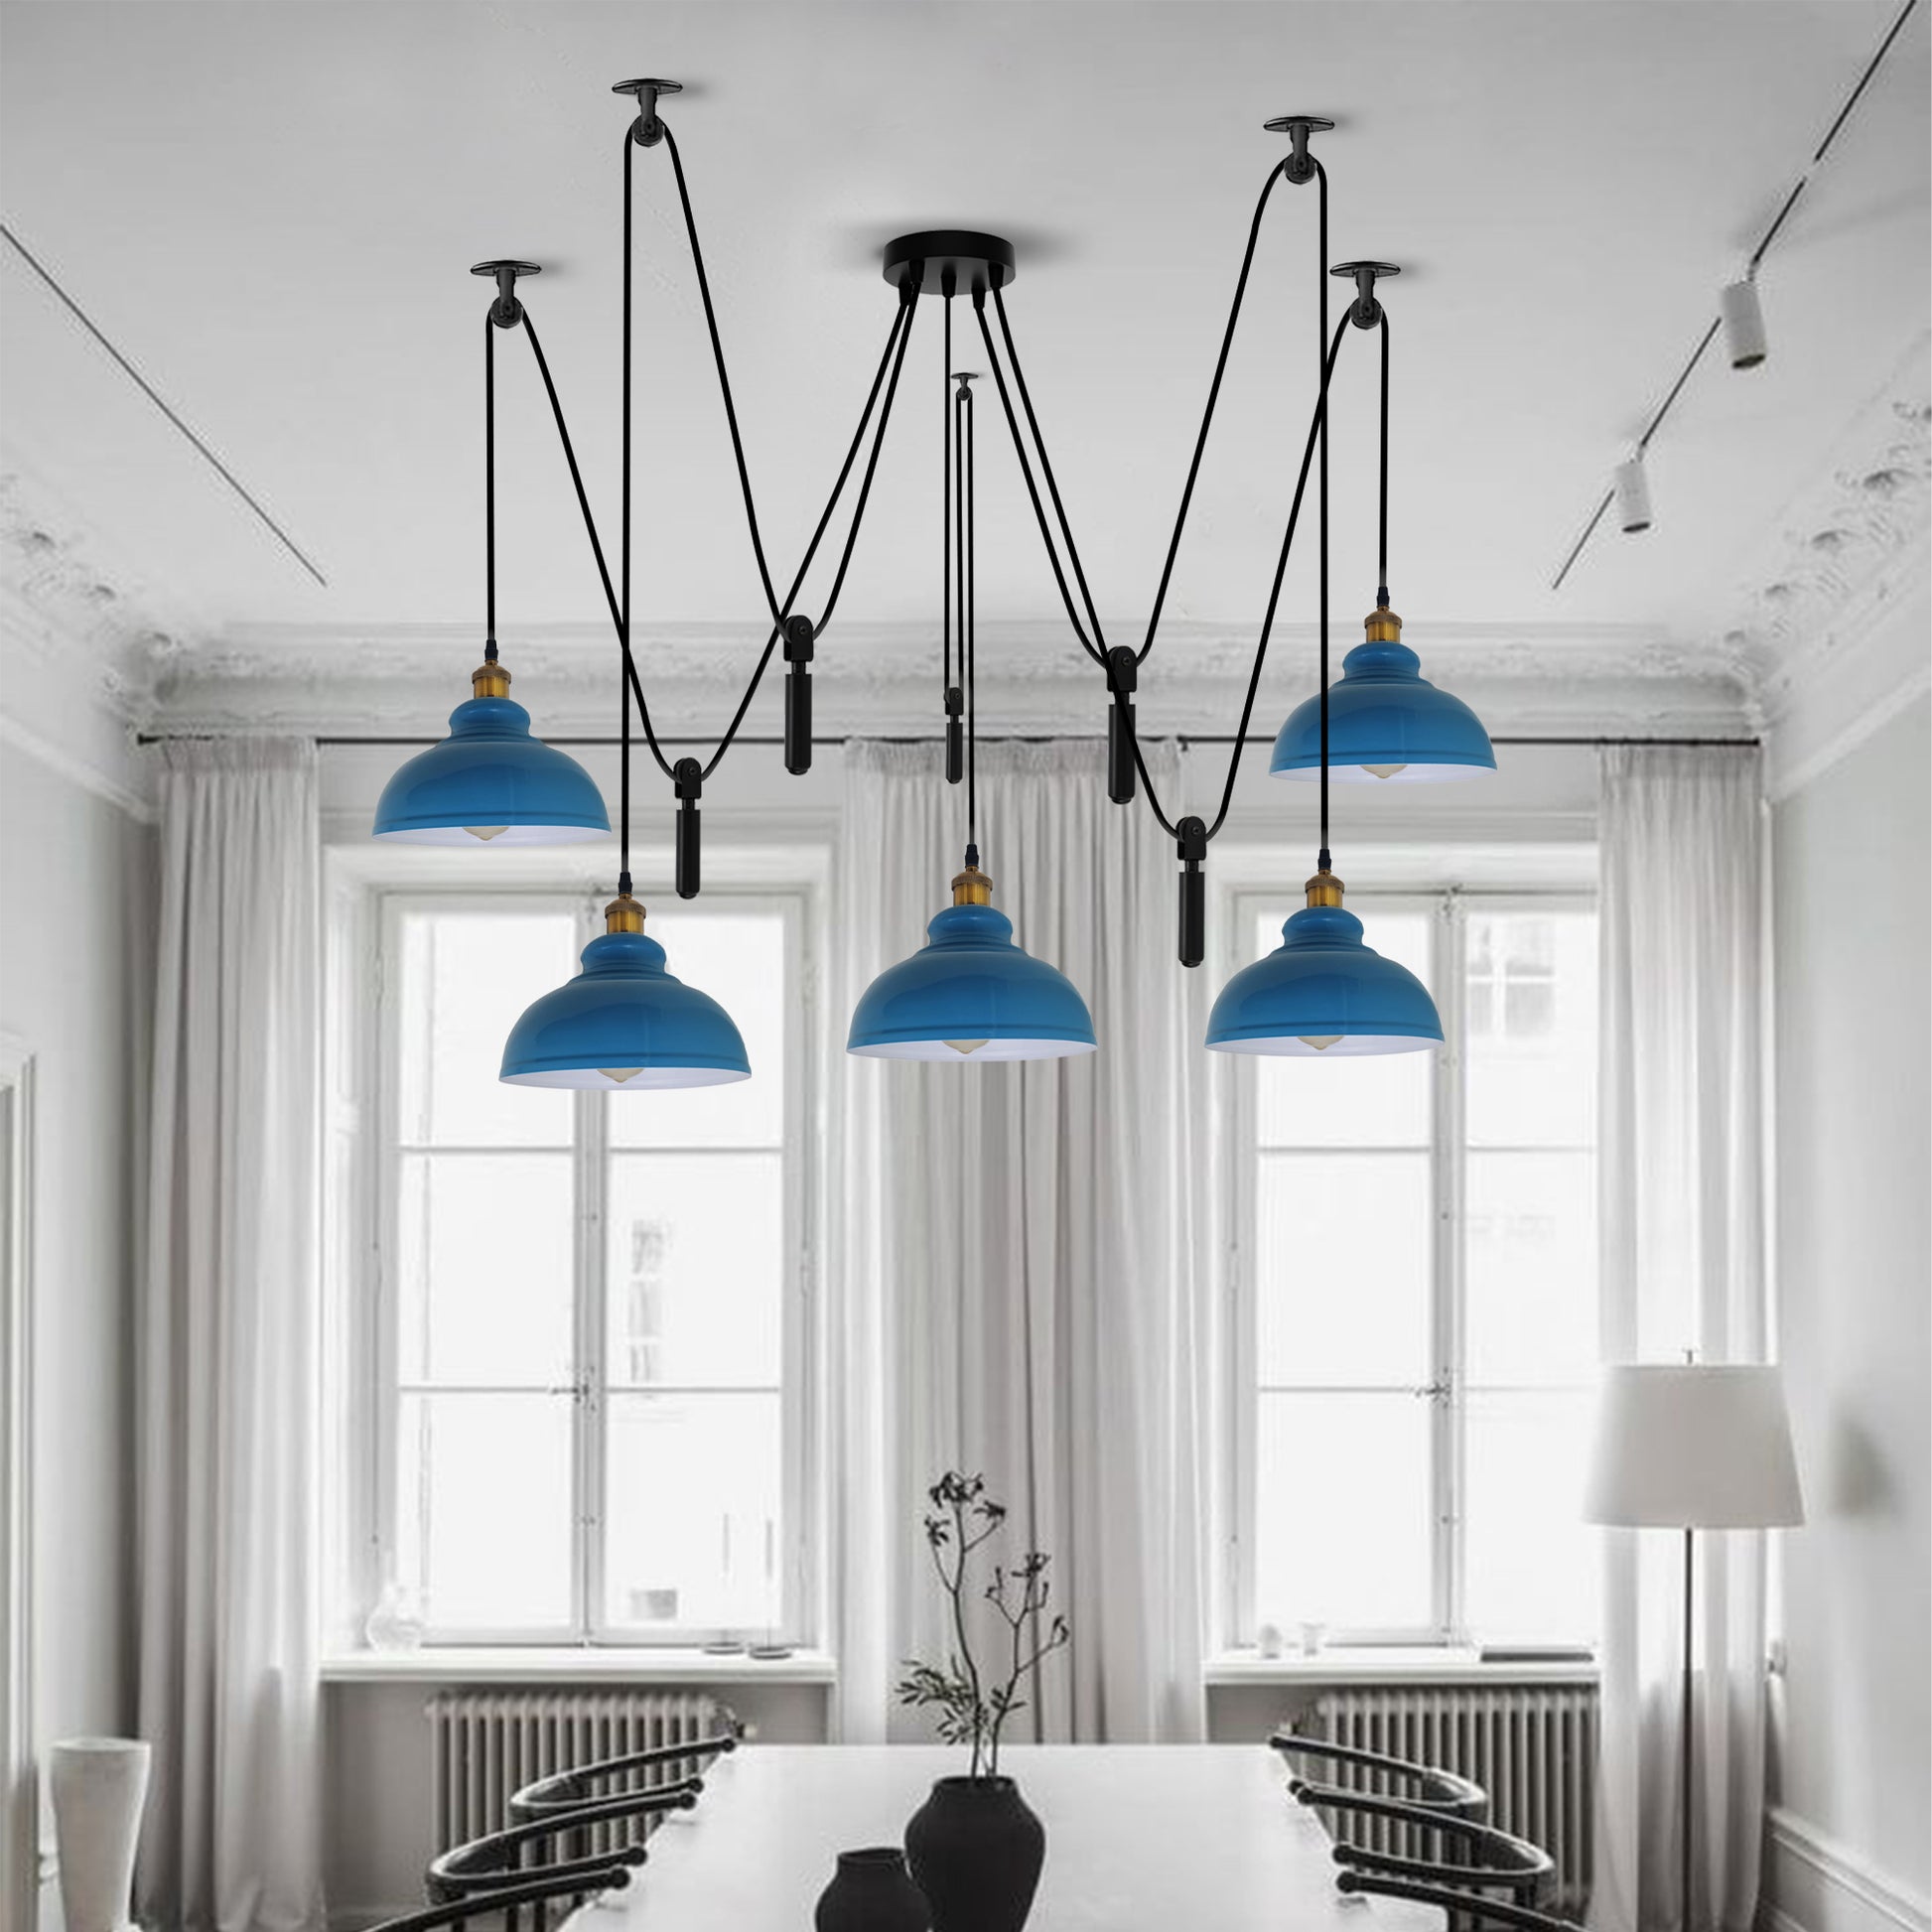  Dome Shade Ceiling Pendant Light 